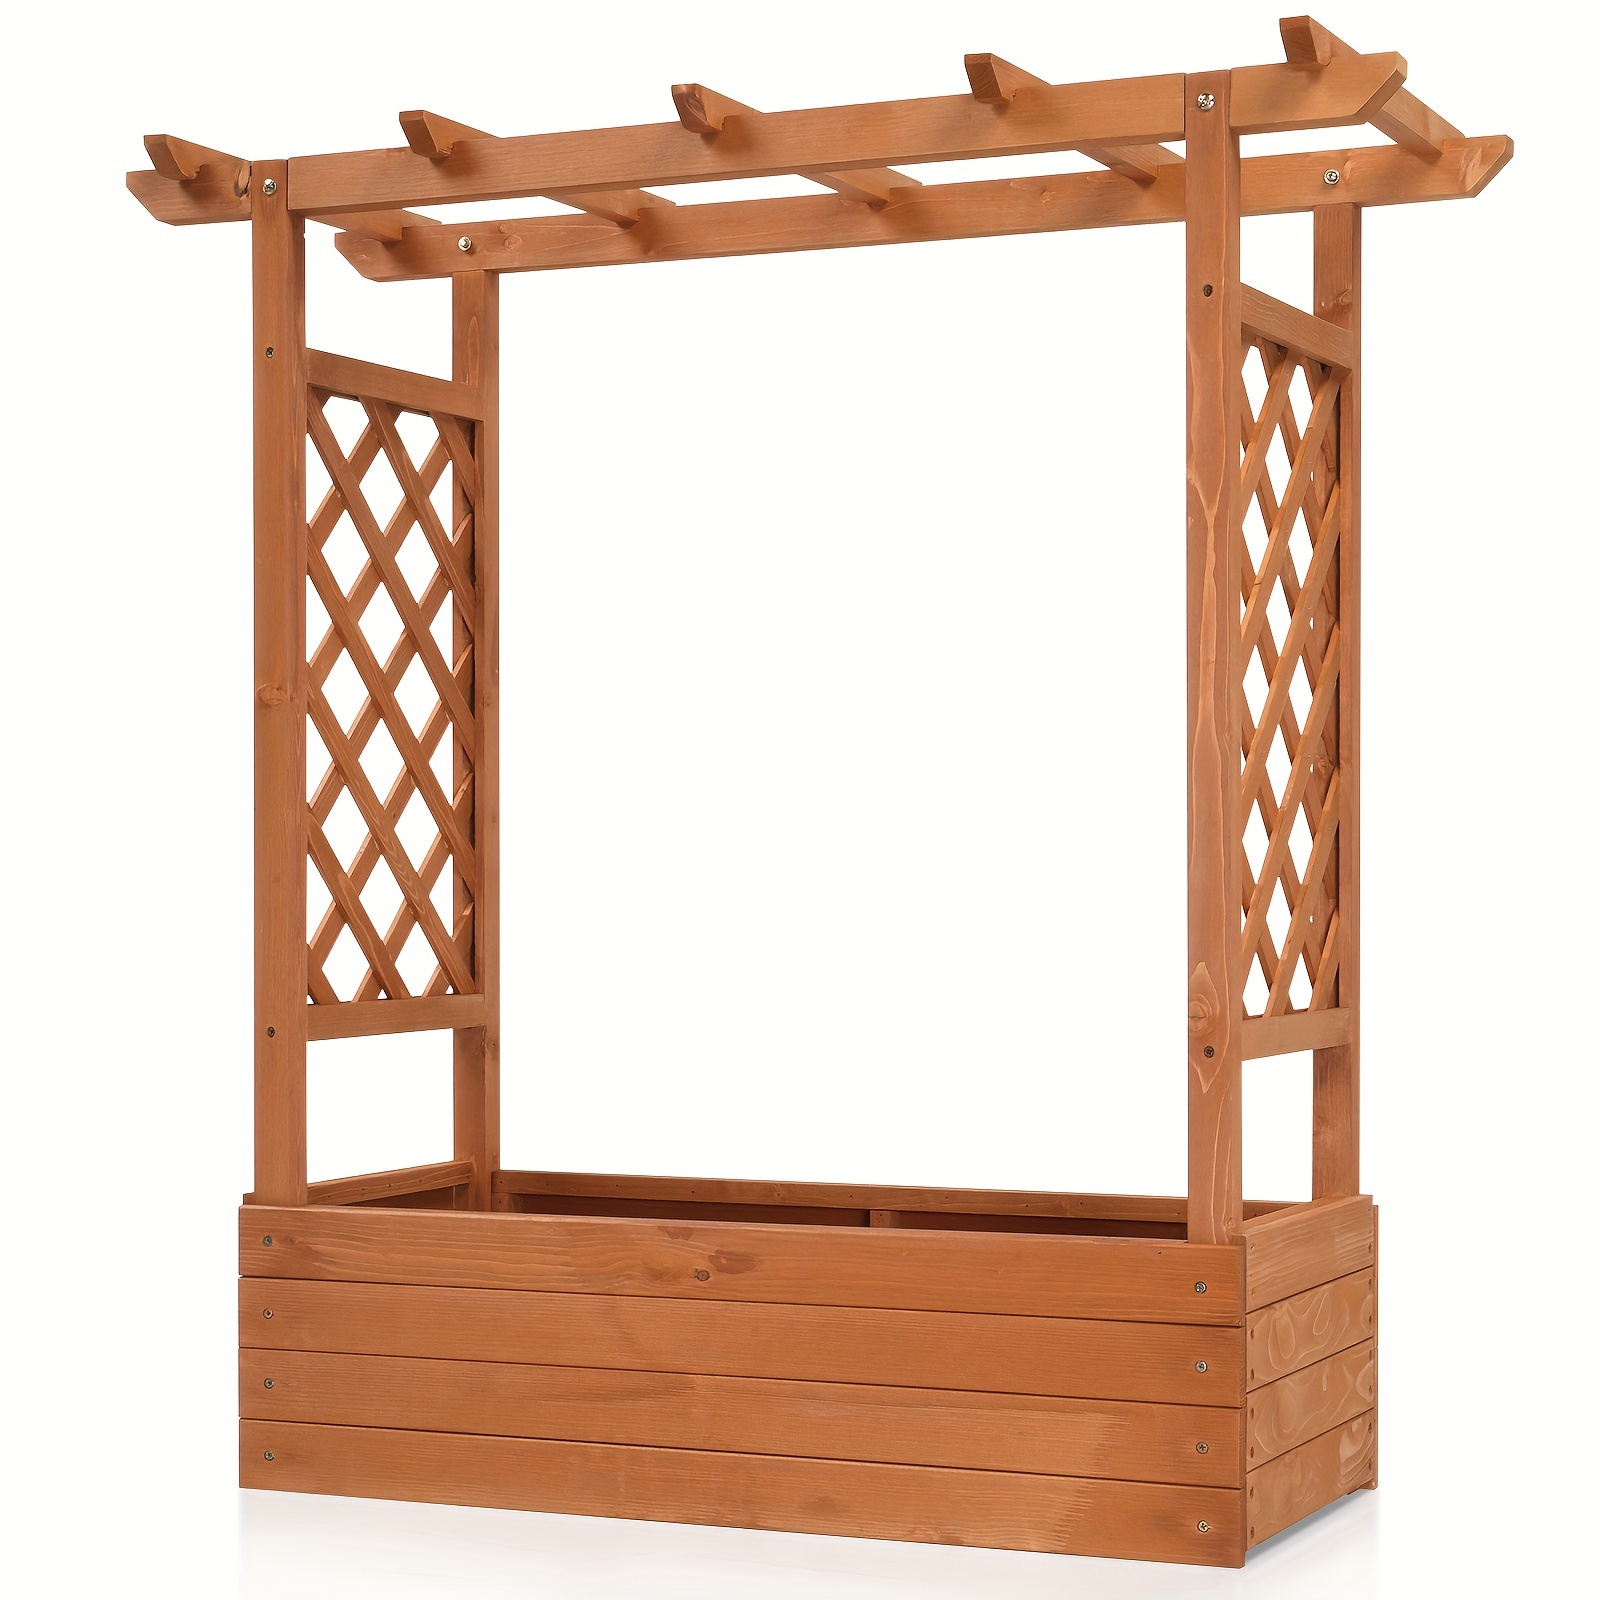 1 Pack, 43.5*17.5*44.5 In Fir With Arched Lattice Raised Garden Bed Wooden  Planting Frame Teak Color